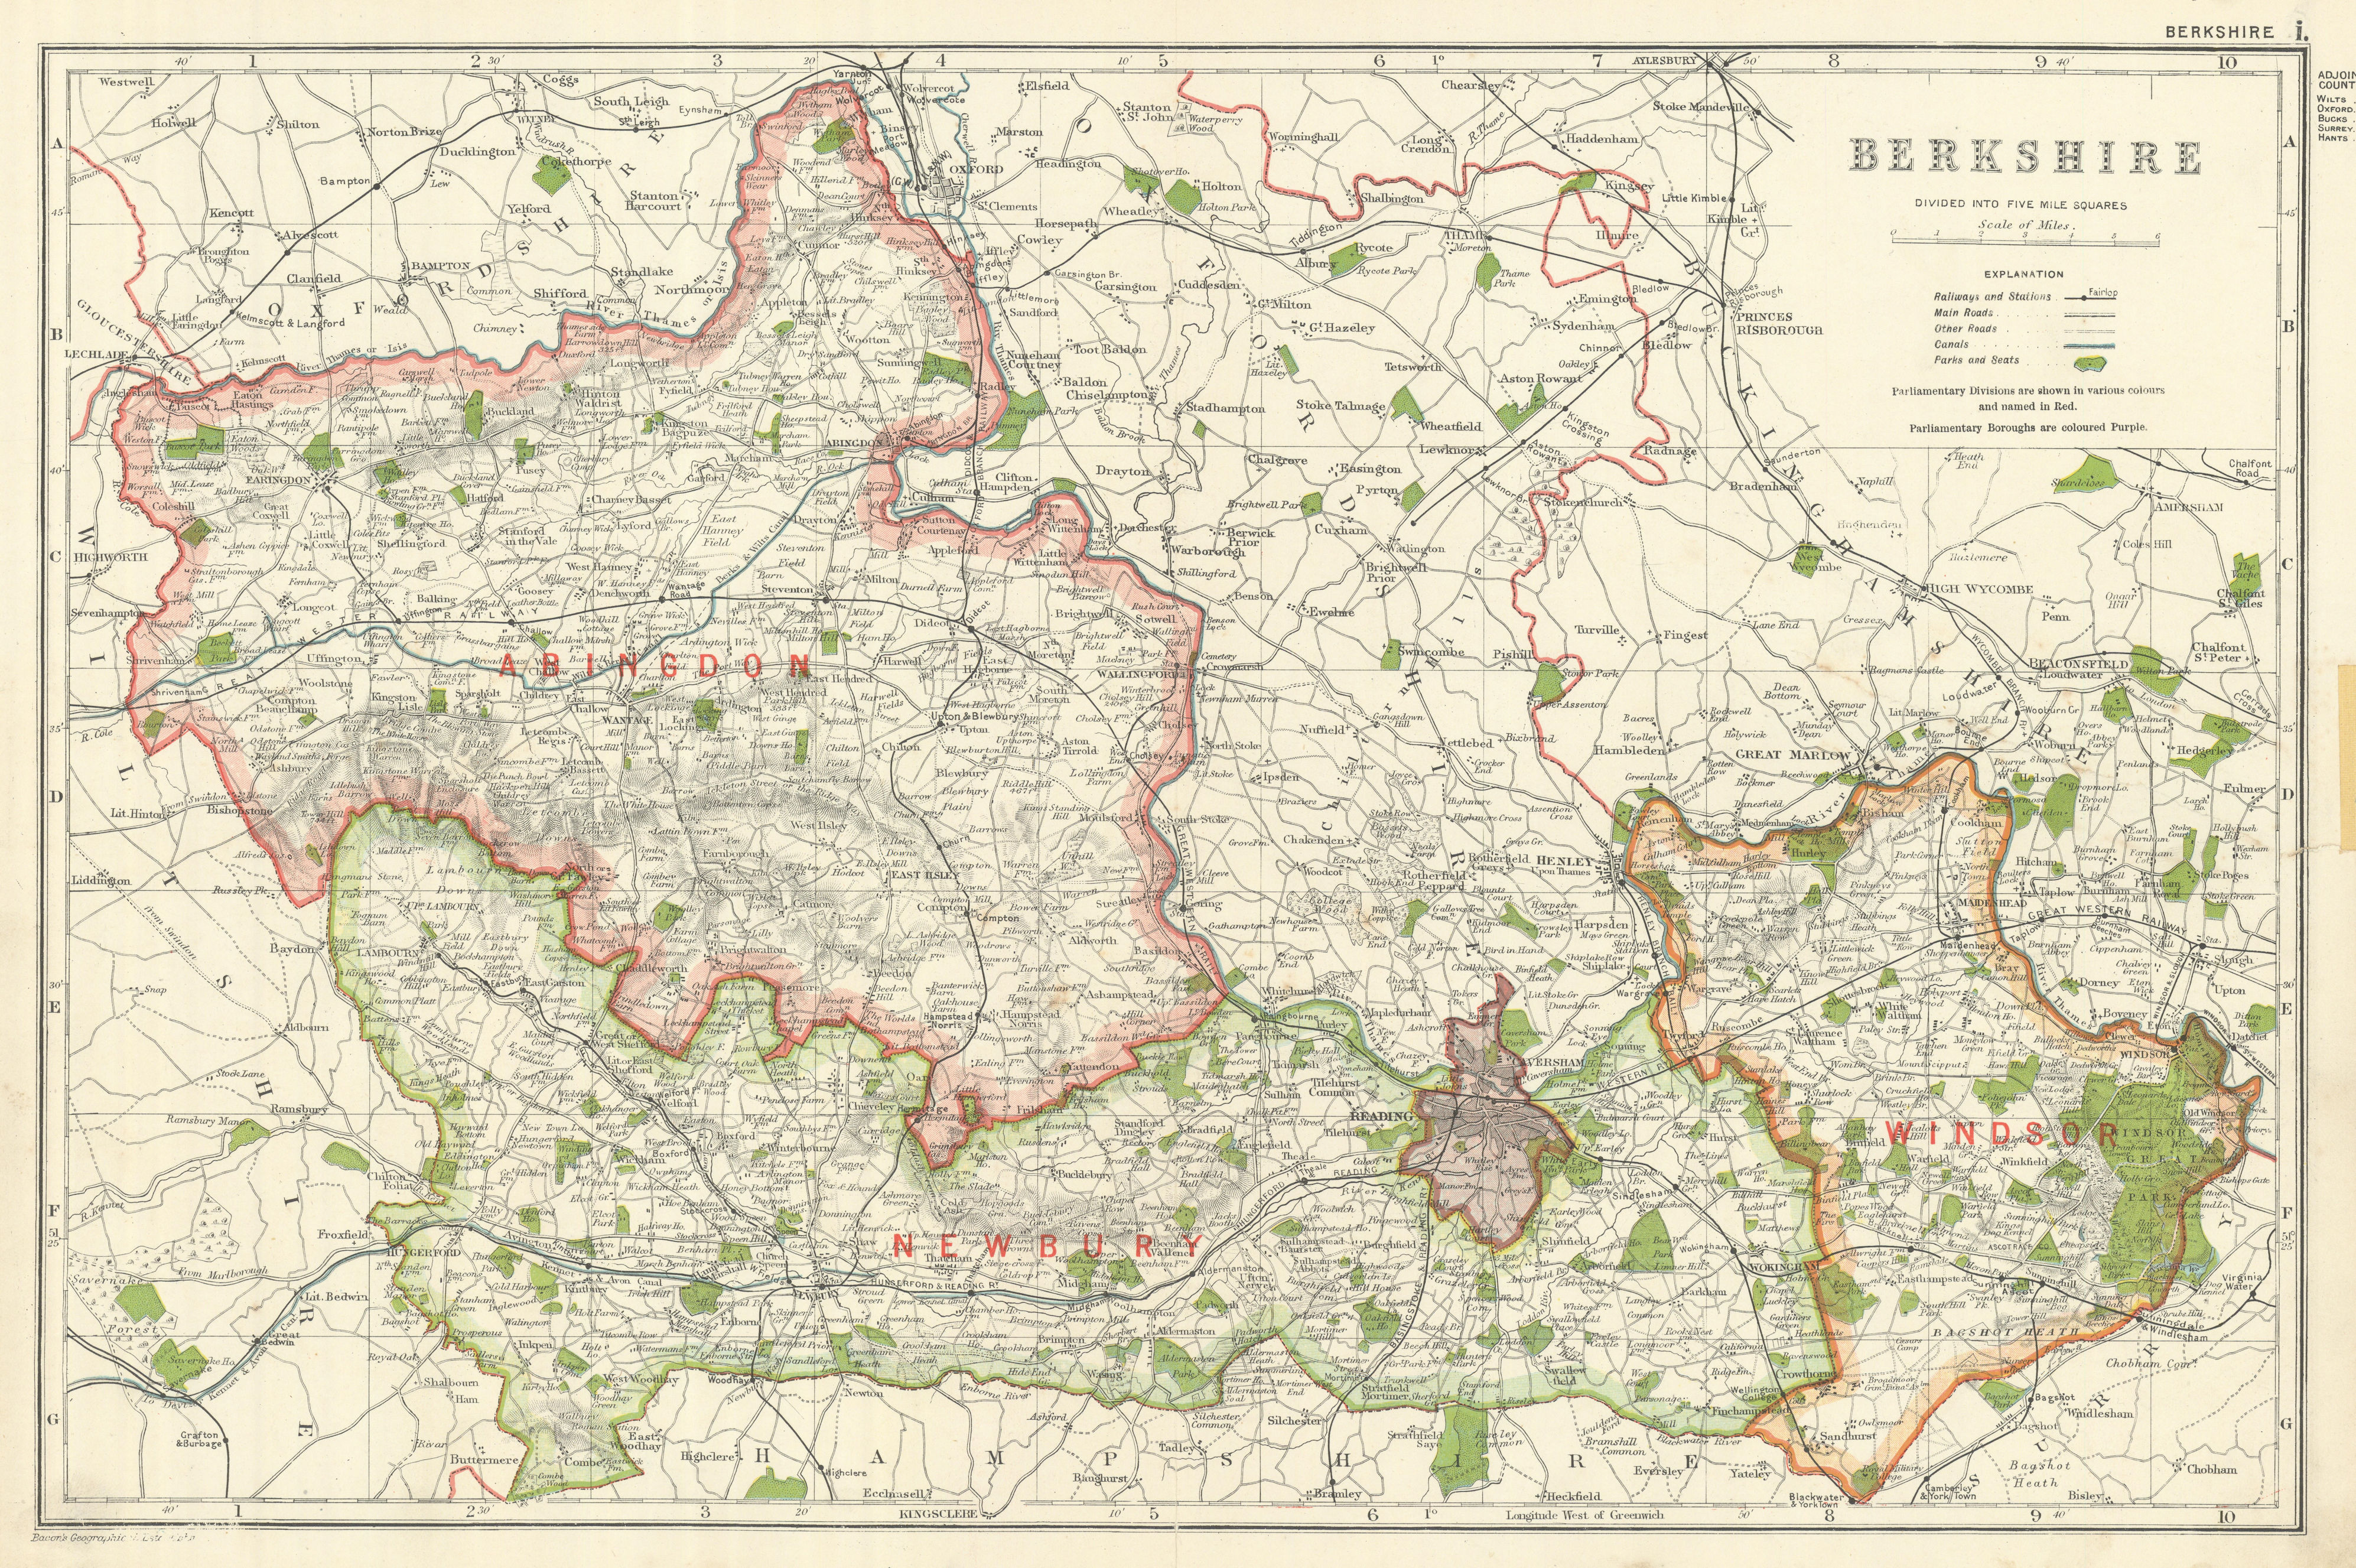 Associate Product BERKSHIRE. Showing Parliamentary divisions, boroughs & parks. BACON 1919 map